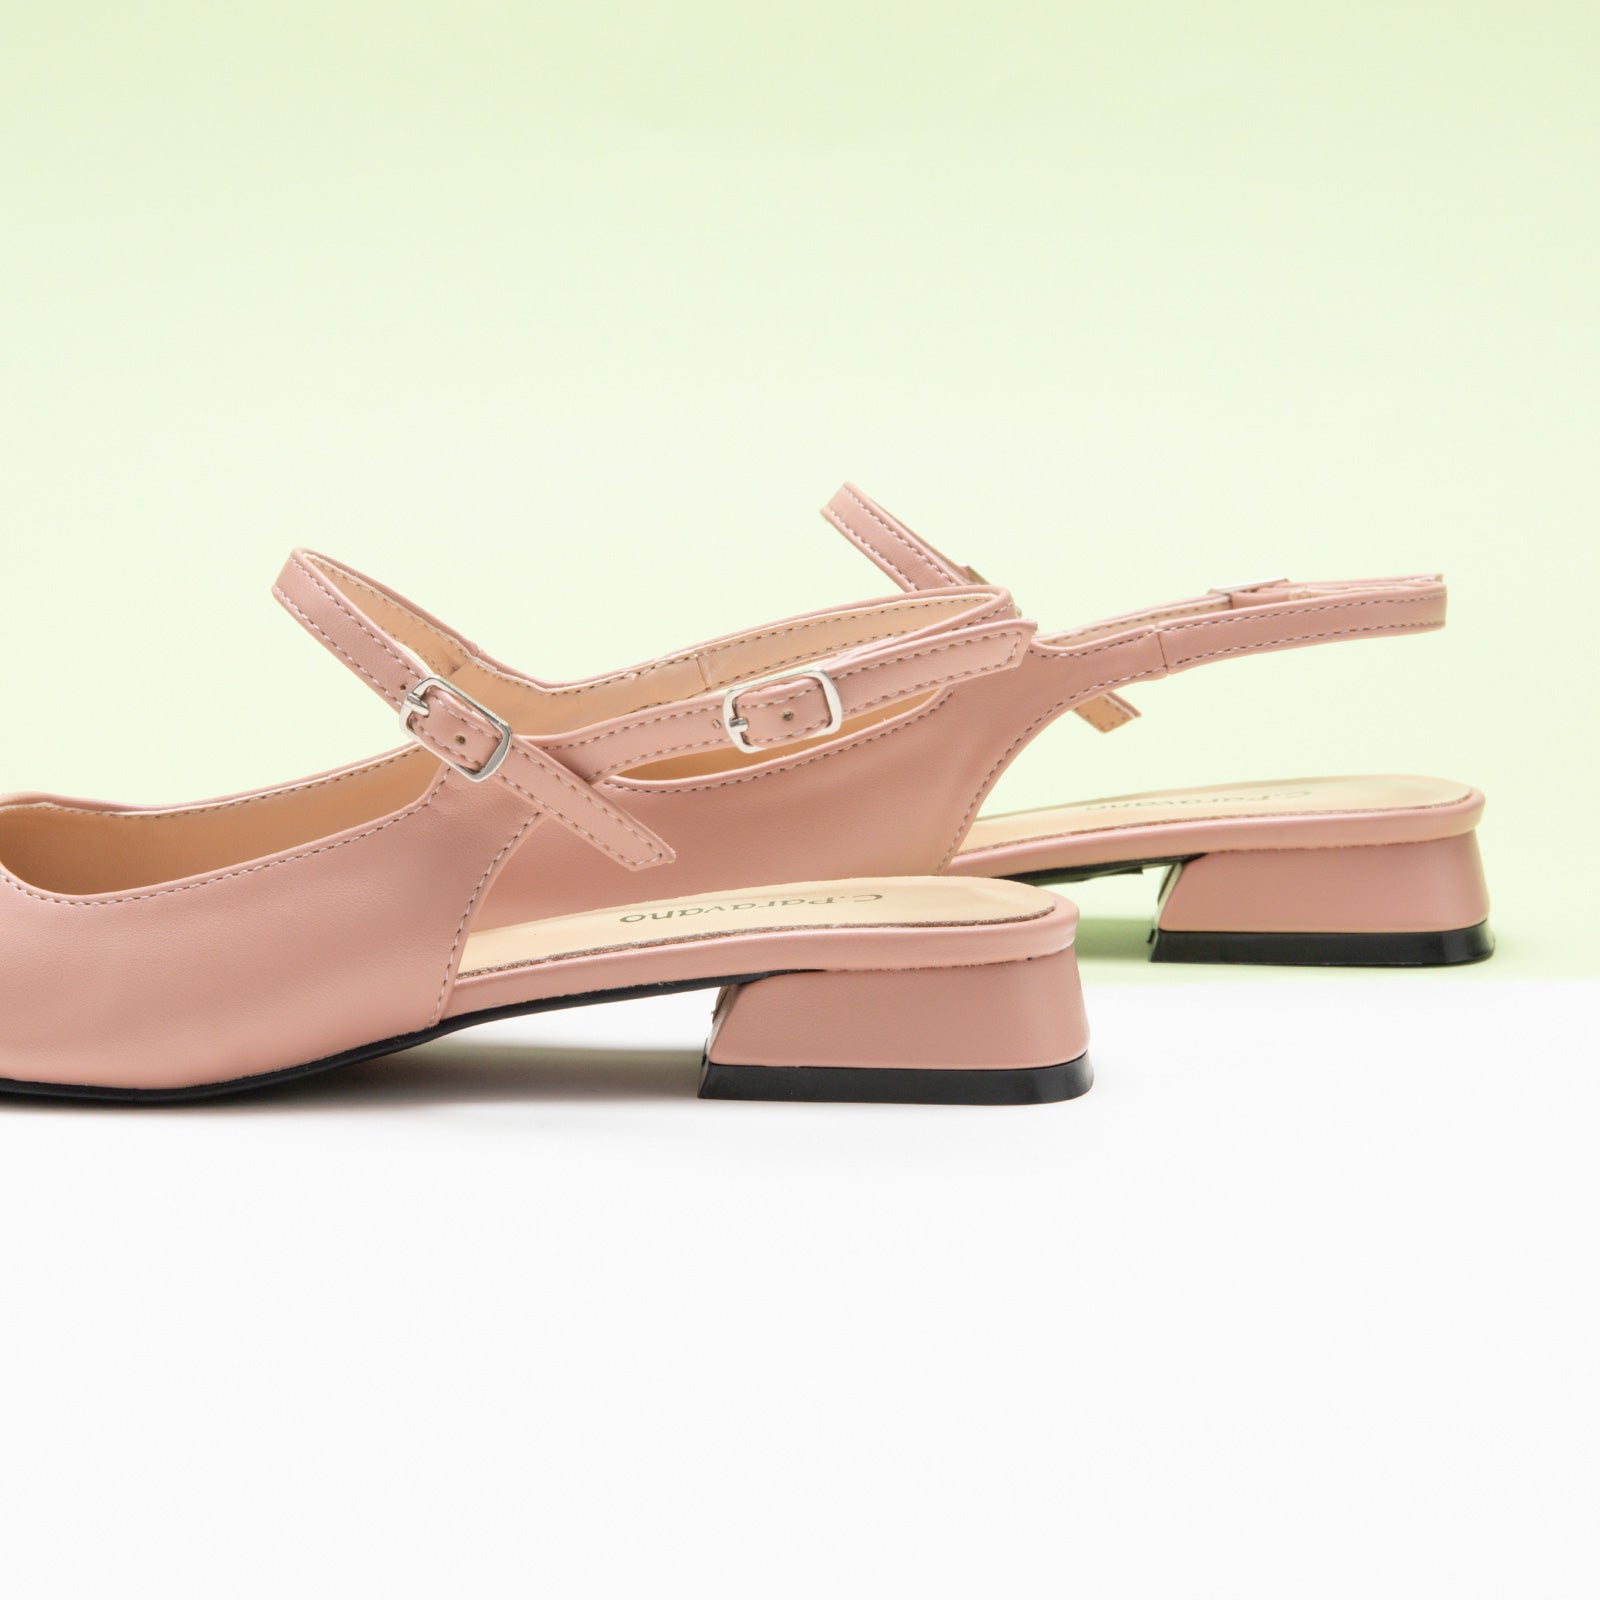  Pink Squared Toe Slingback Flats, featuring delicate details for a polished and sophisticated style